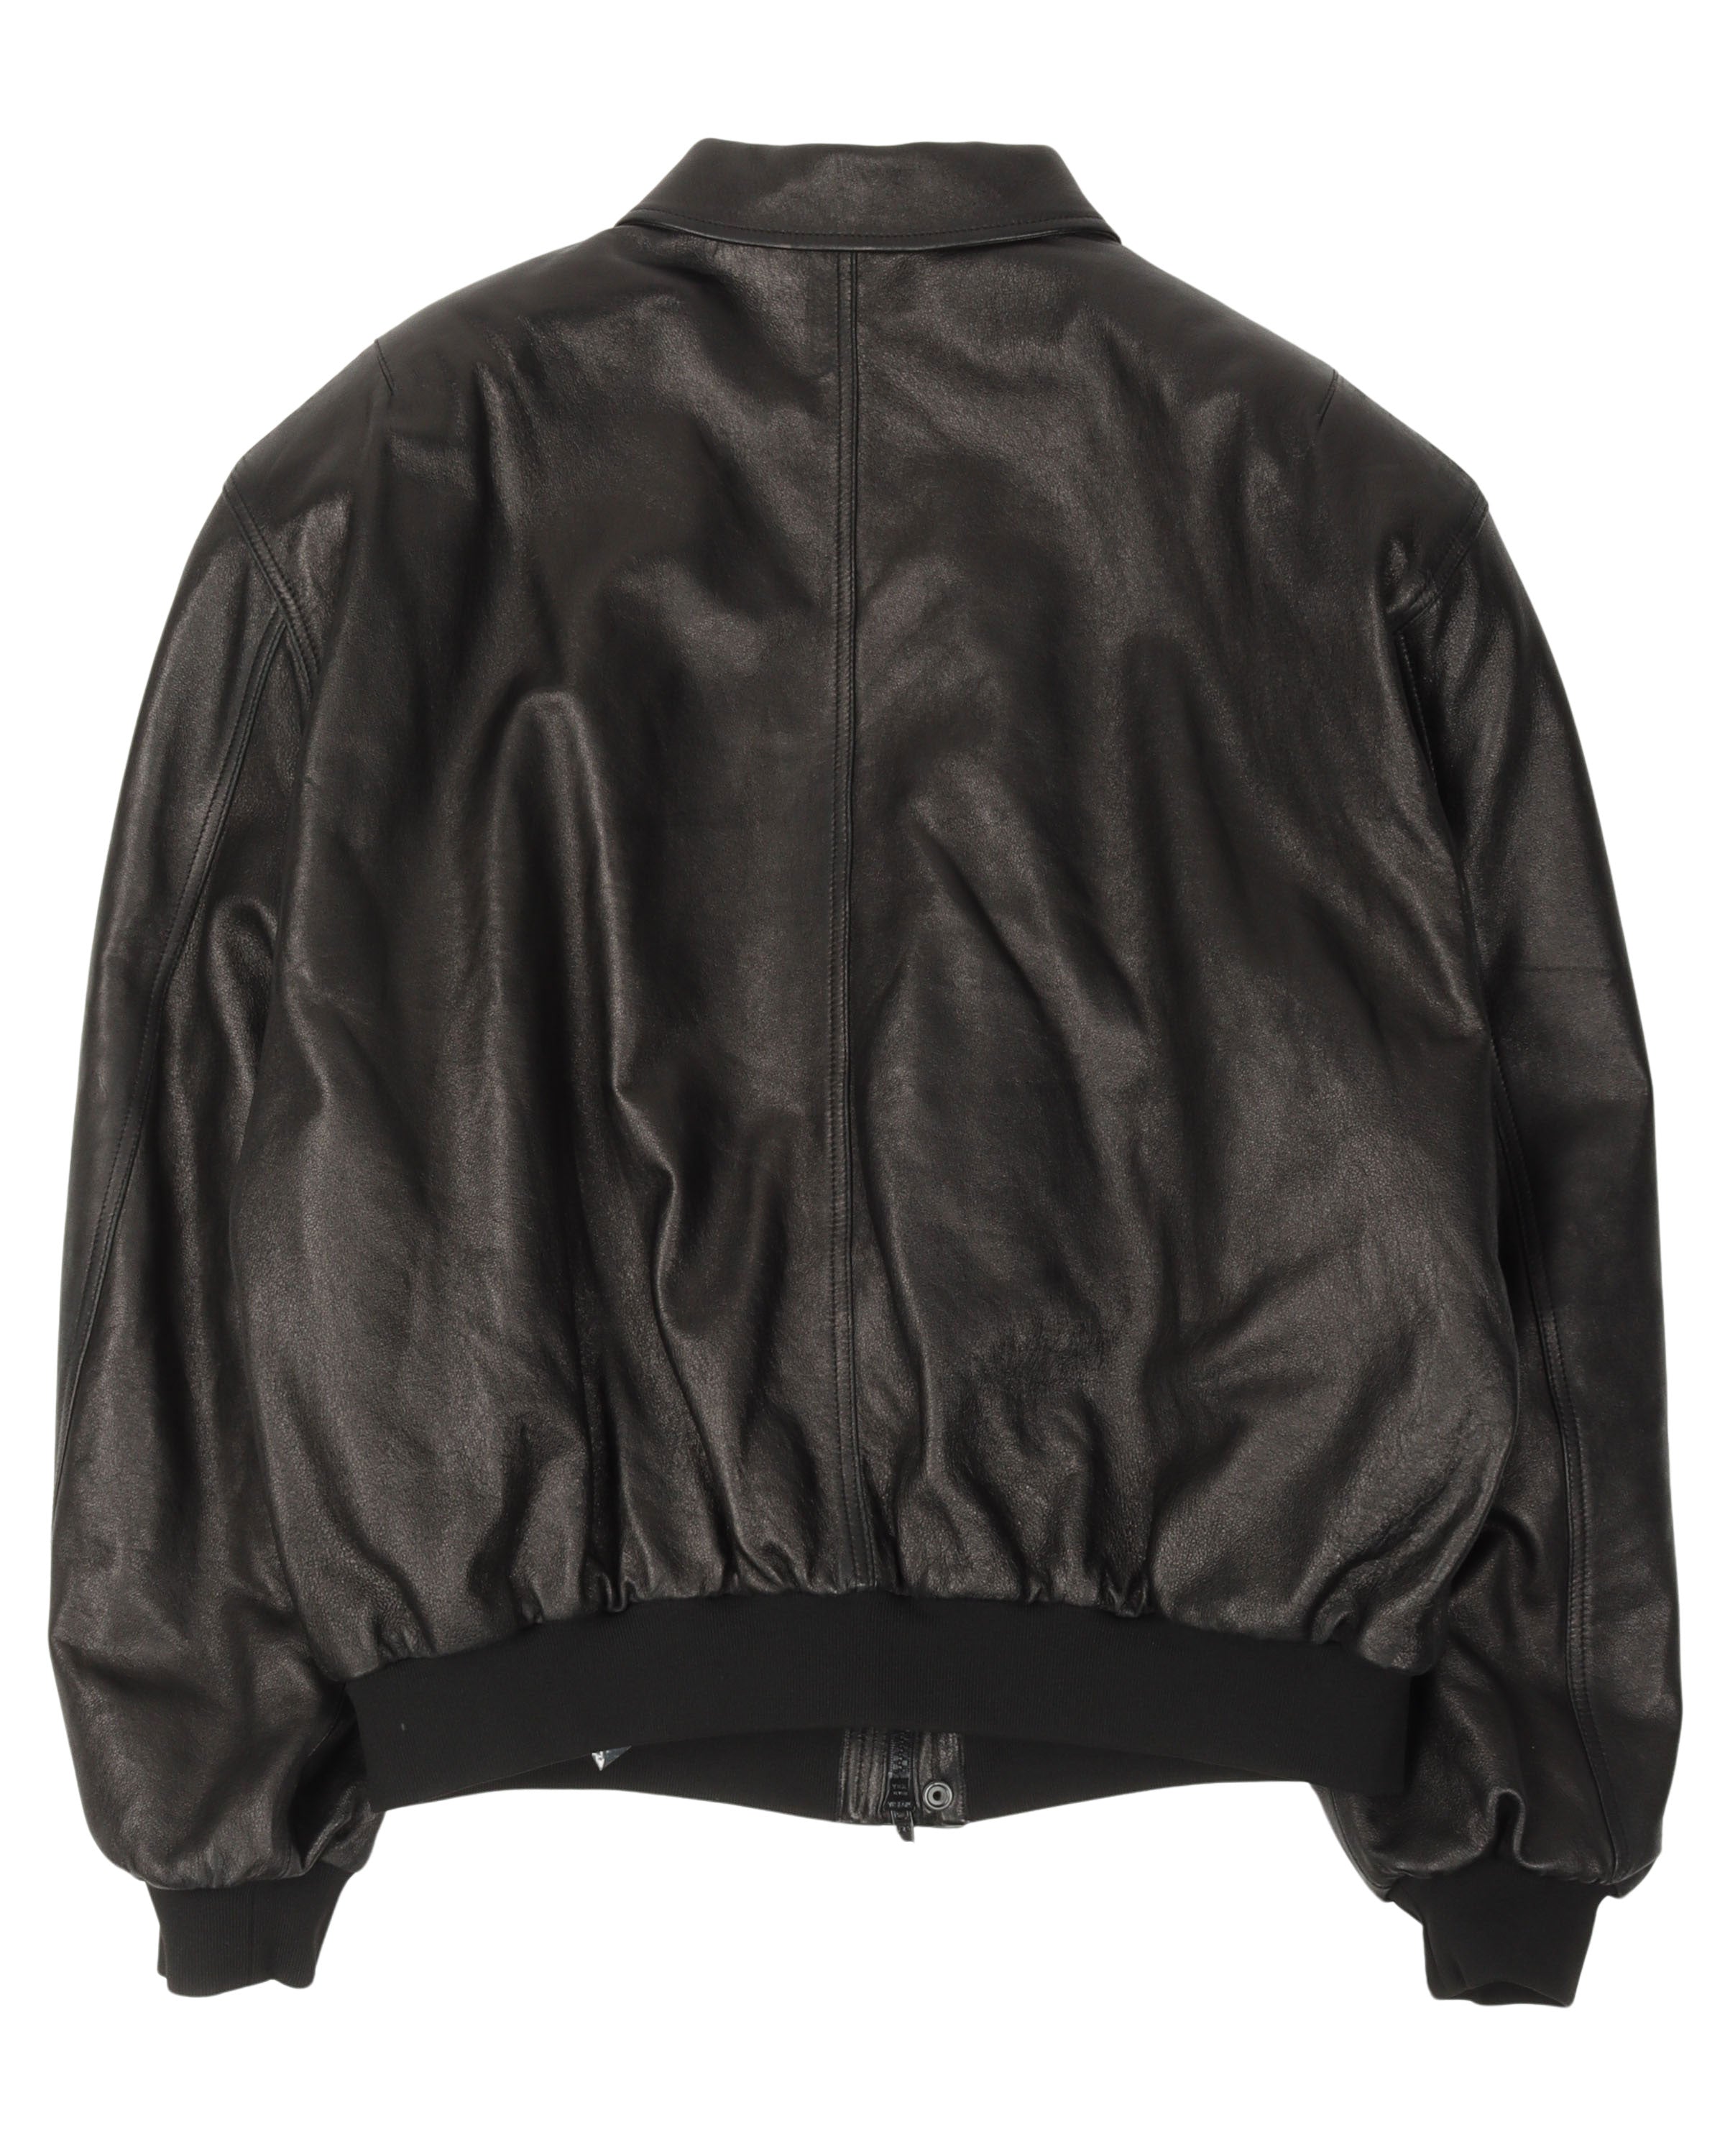 Sporty B Leather Taxi Jacket